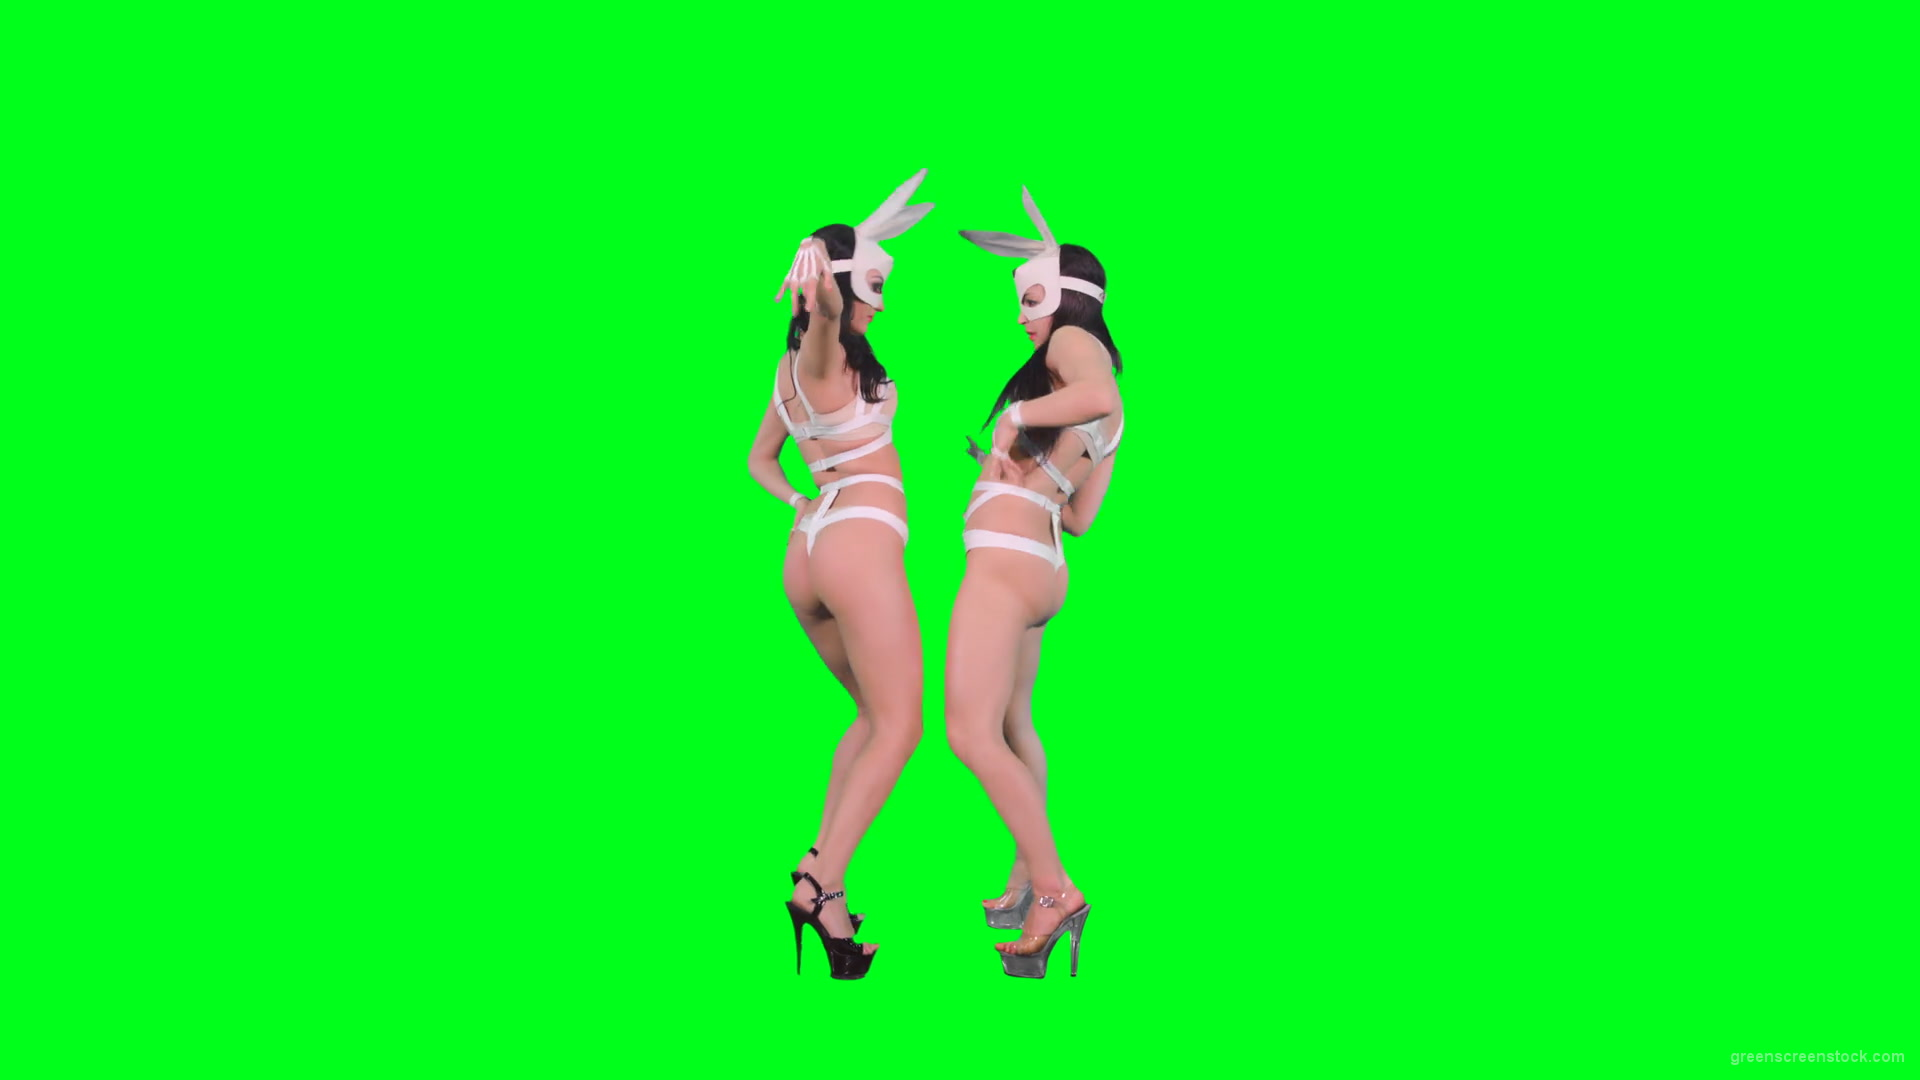 Light-erotic-girls-in-rabbit-playboy-costumes-on-green-screen-moving-sexy-4K-Video-Footage-1920_006 Green Screen Stock